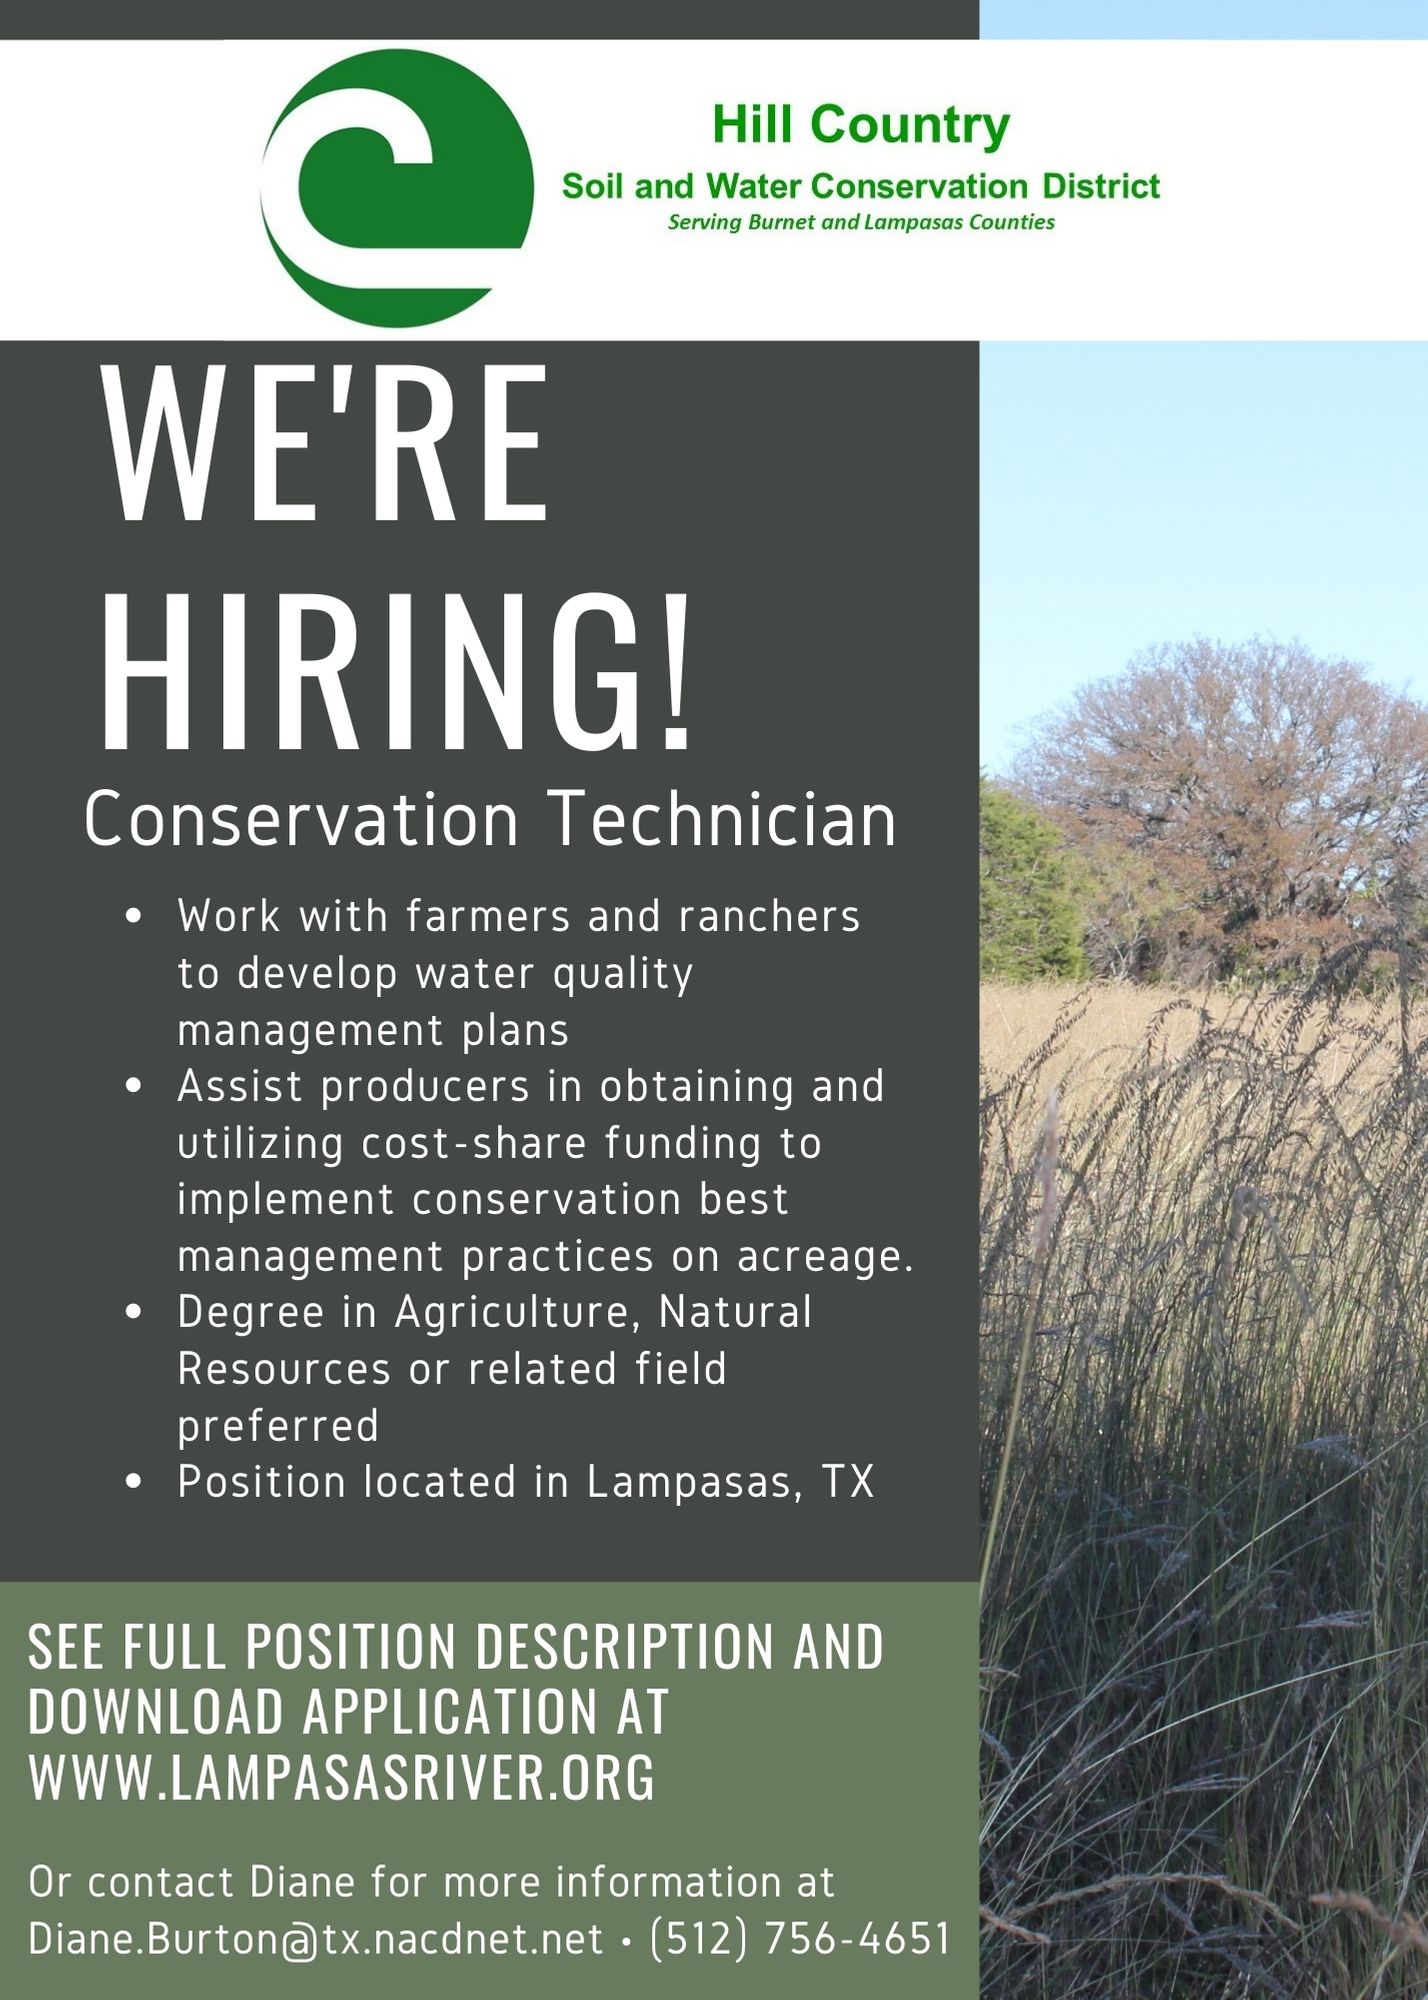 Hill Country Job Vacancy Announcement